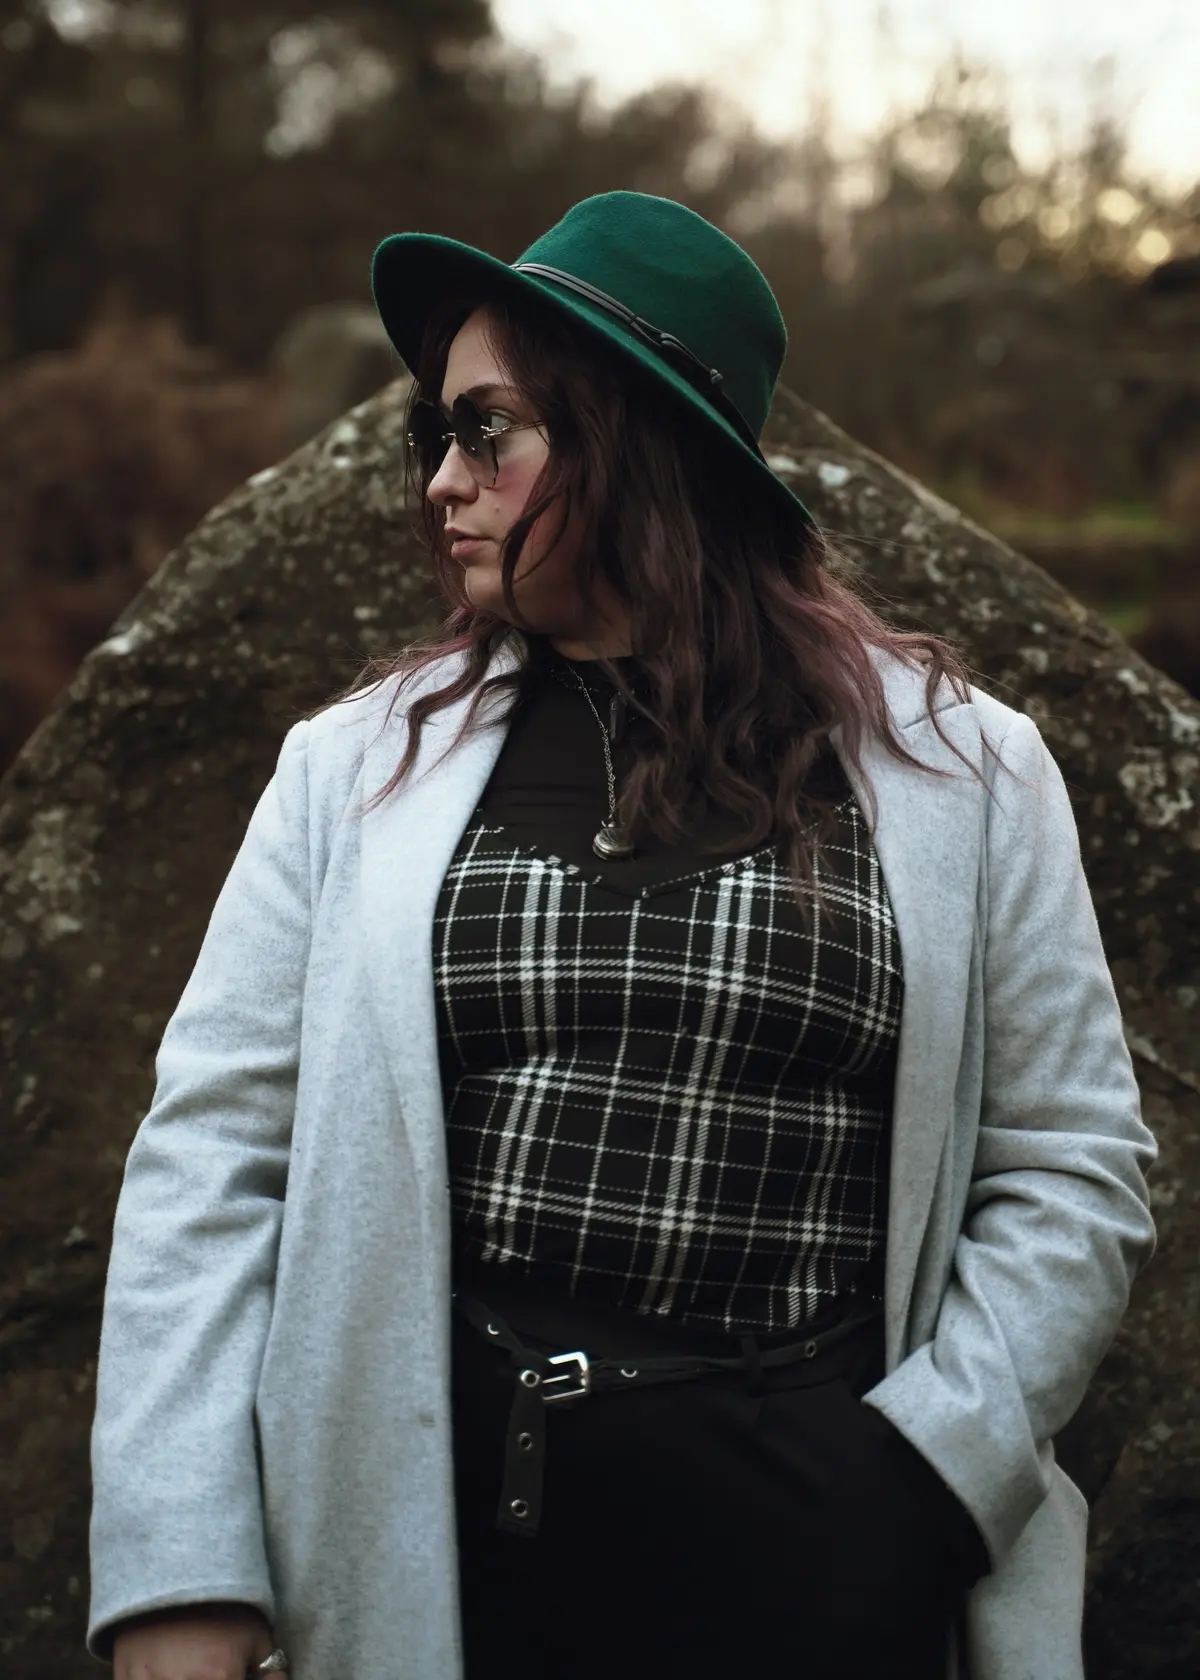 plus size model autumn outfit with black and white checkered top, light grey coat and green hat